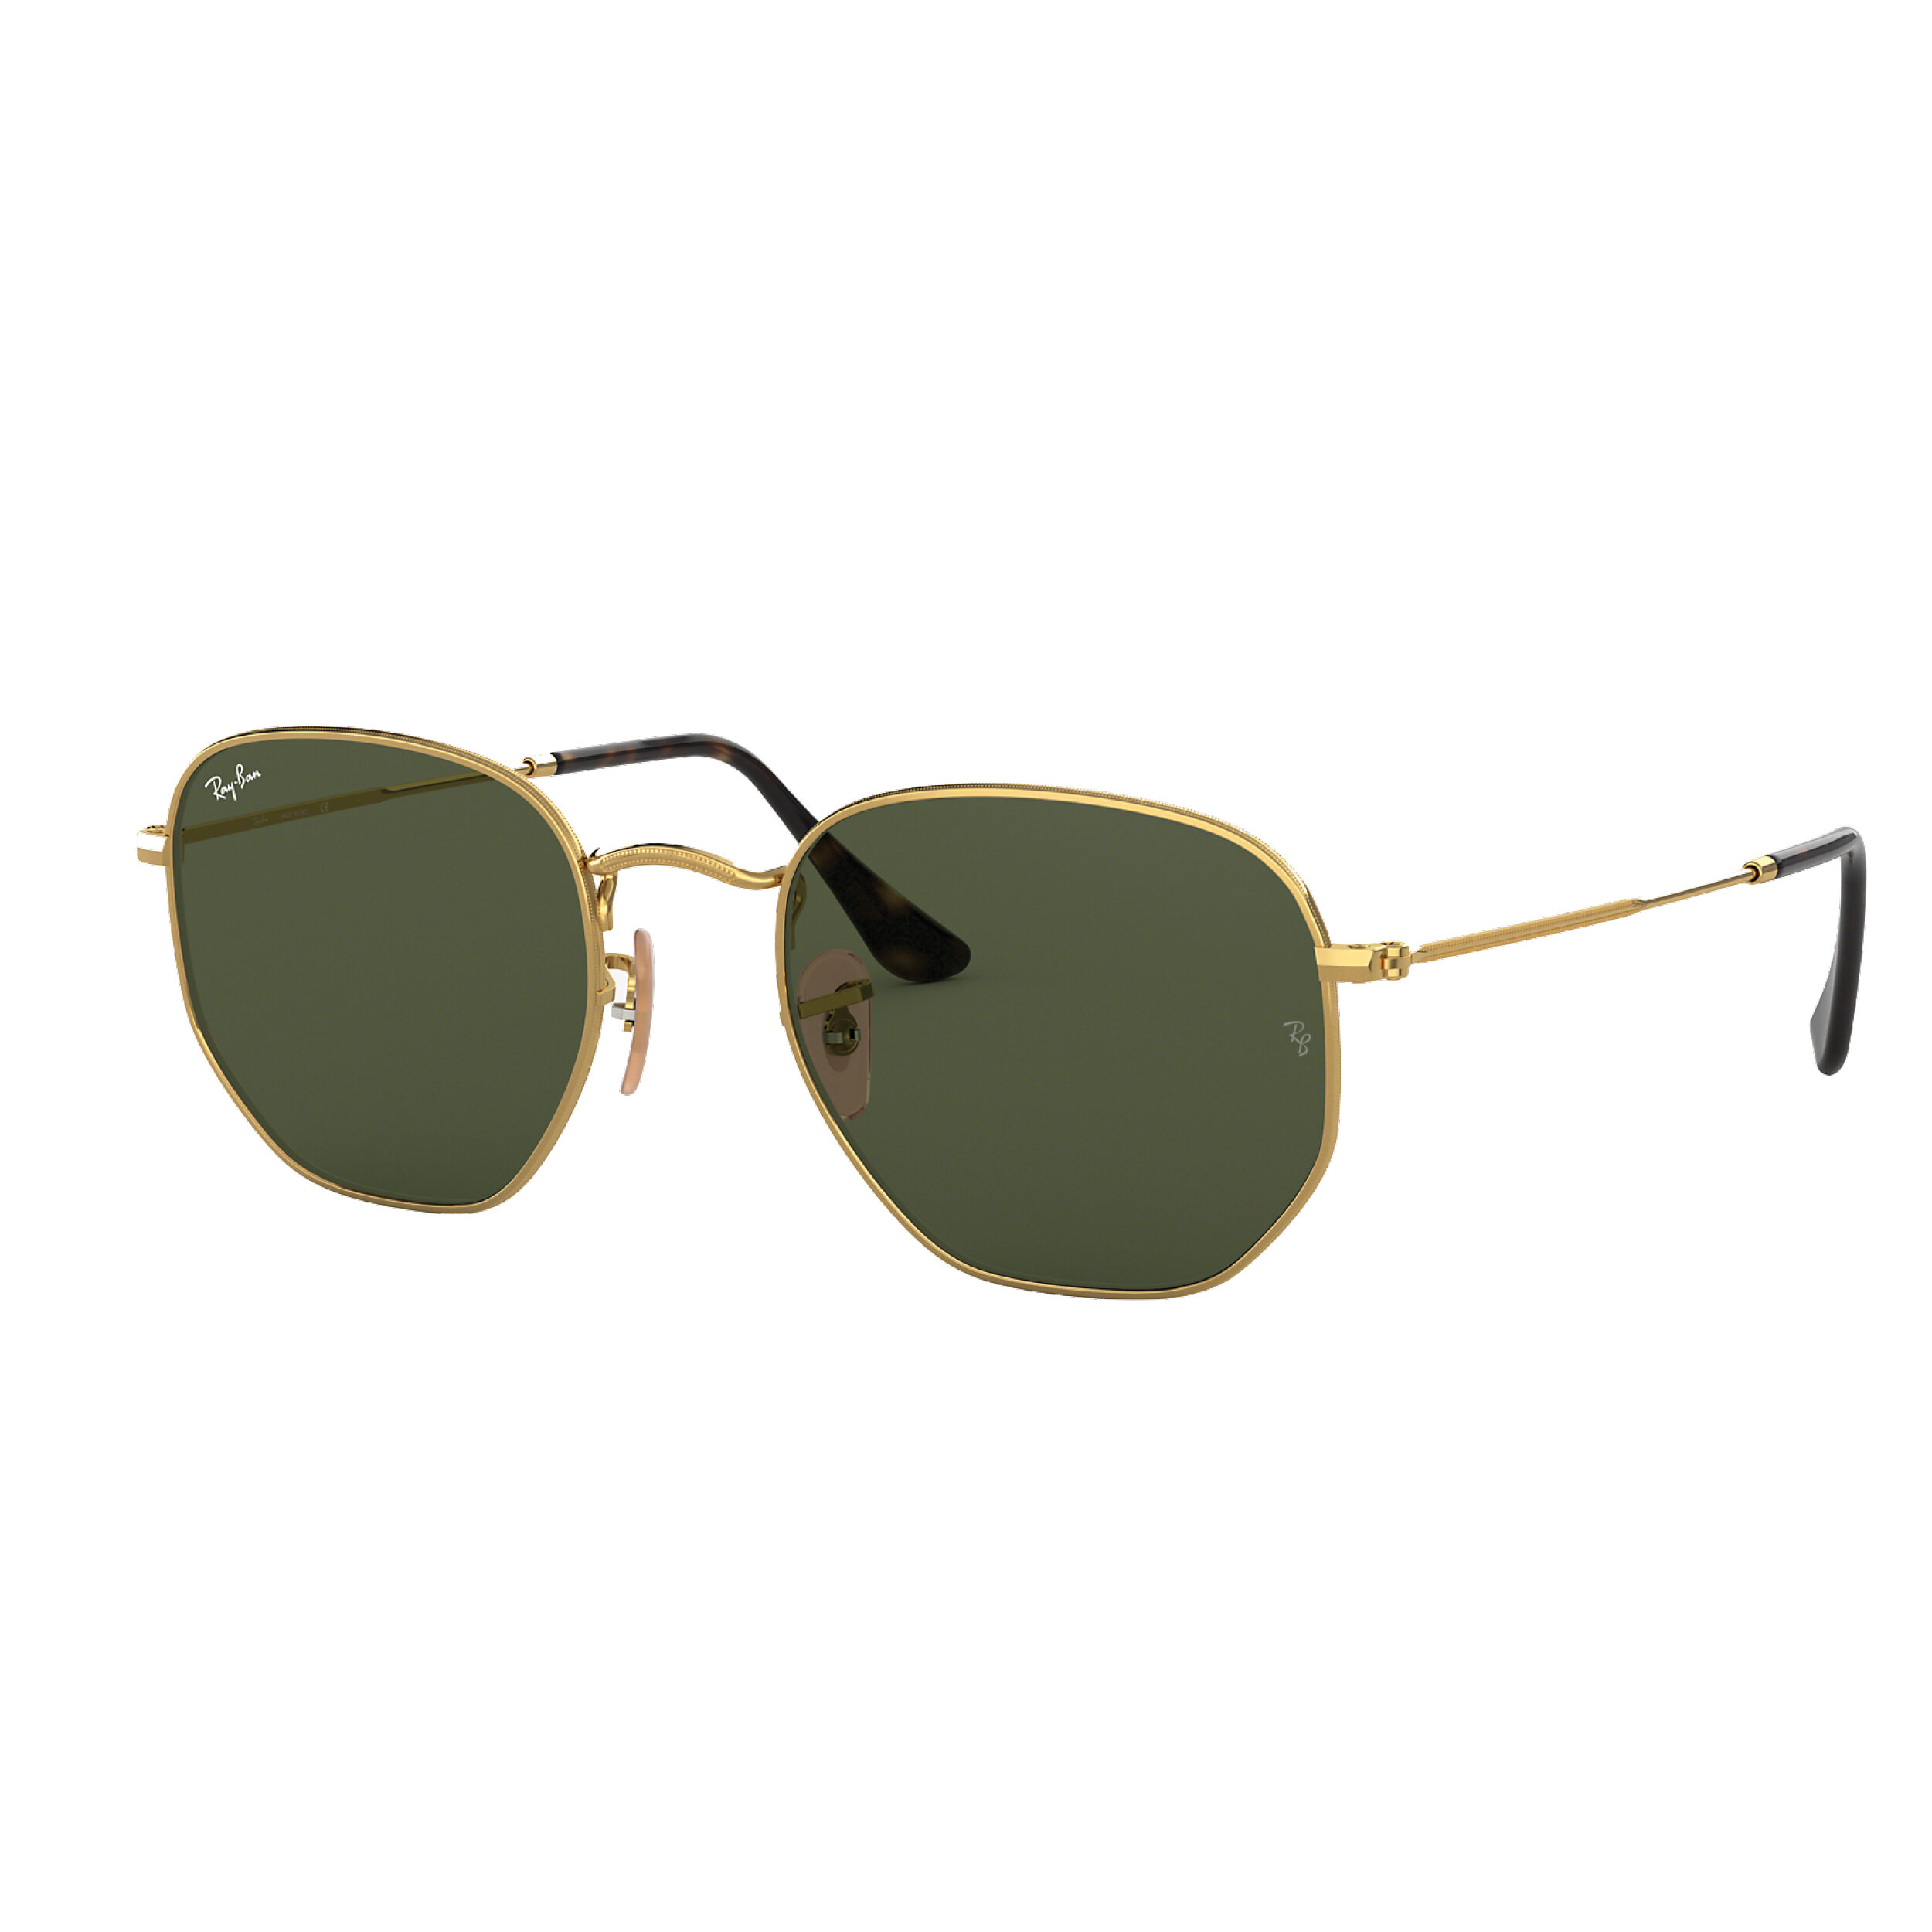 ray ban 1 day sale